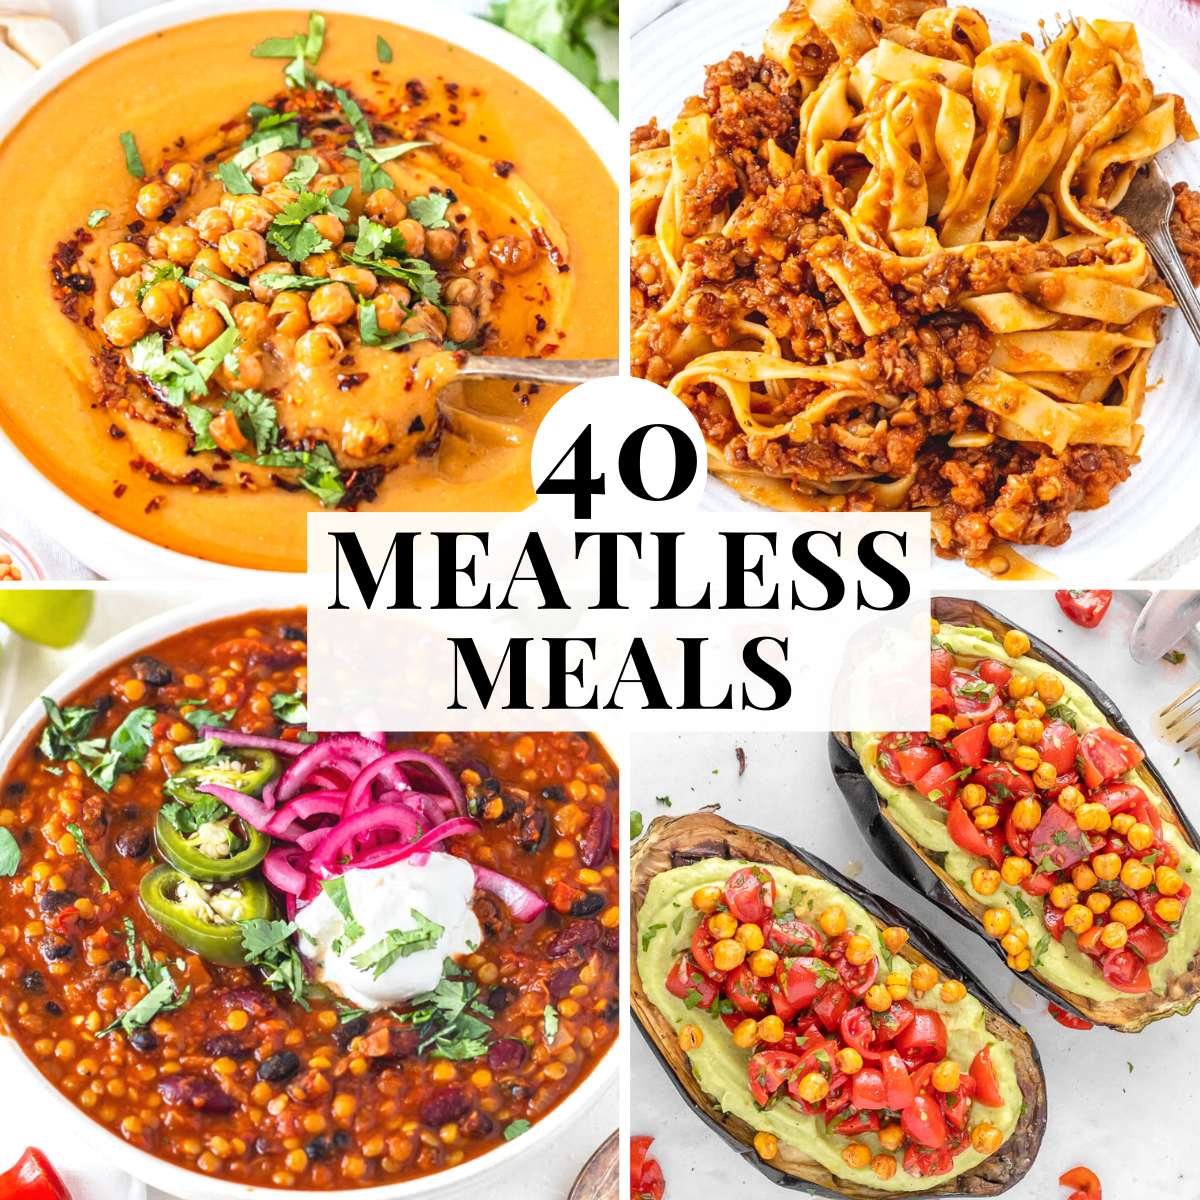 Meatless meals with pasta soups and stews